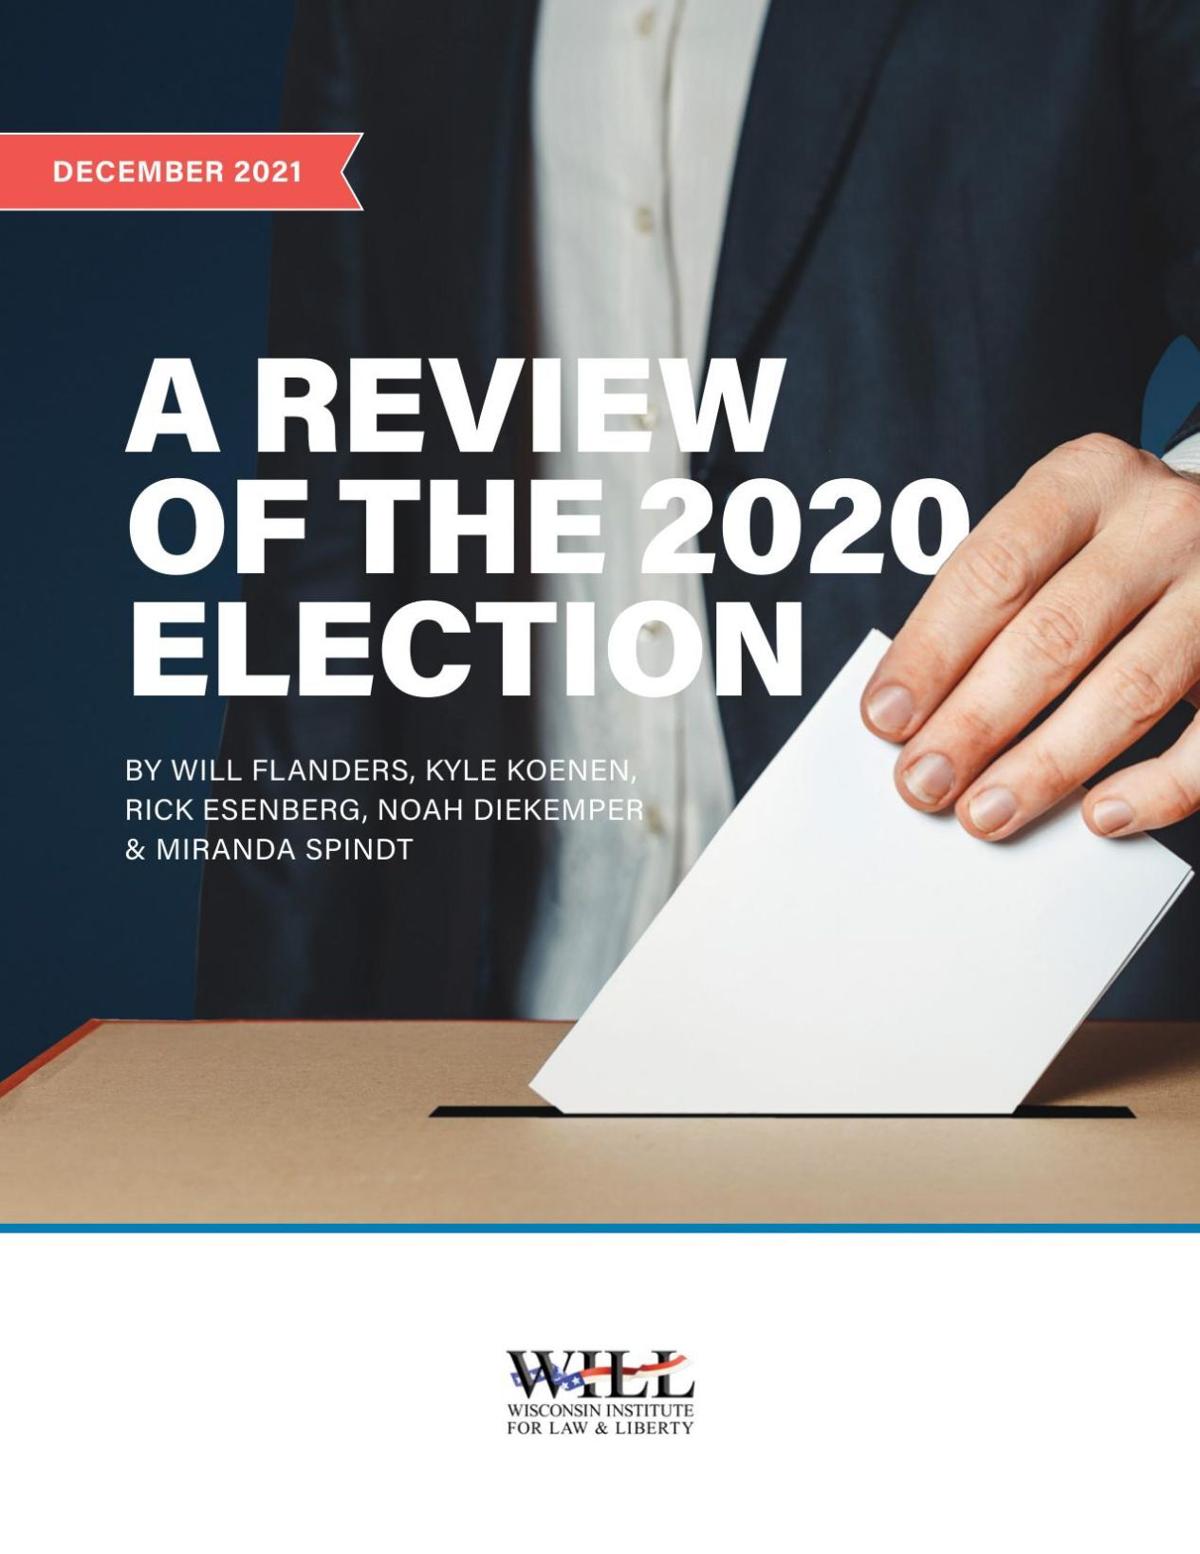 Wisconsin Institute for Law and Liberty election review